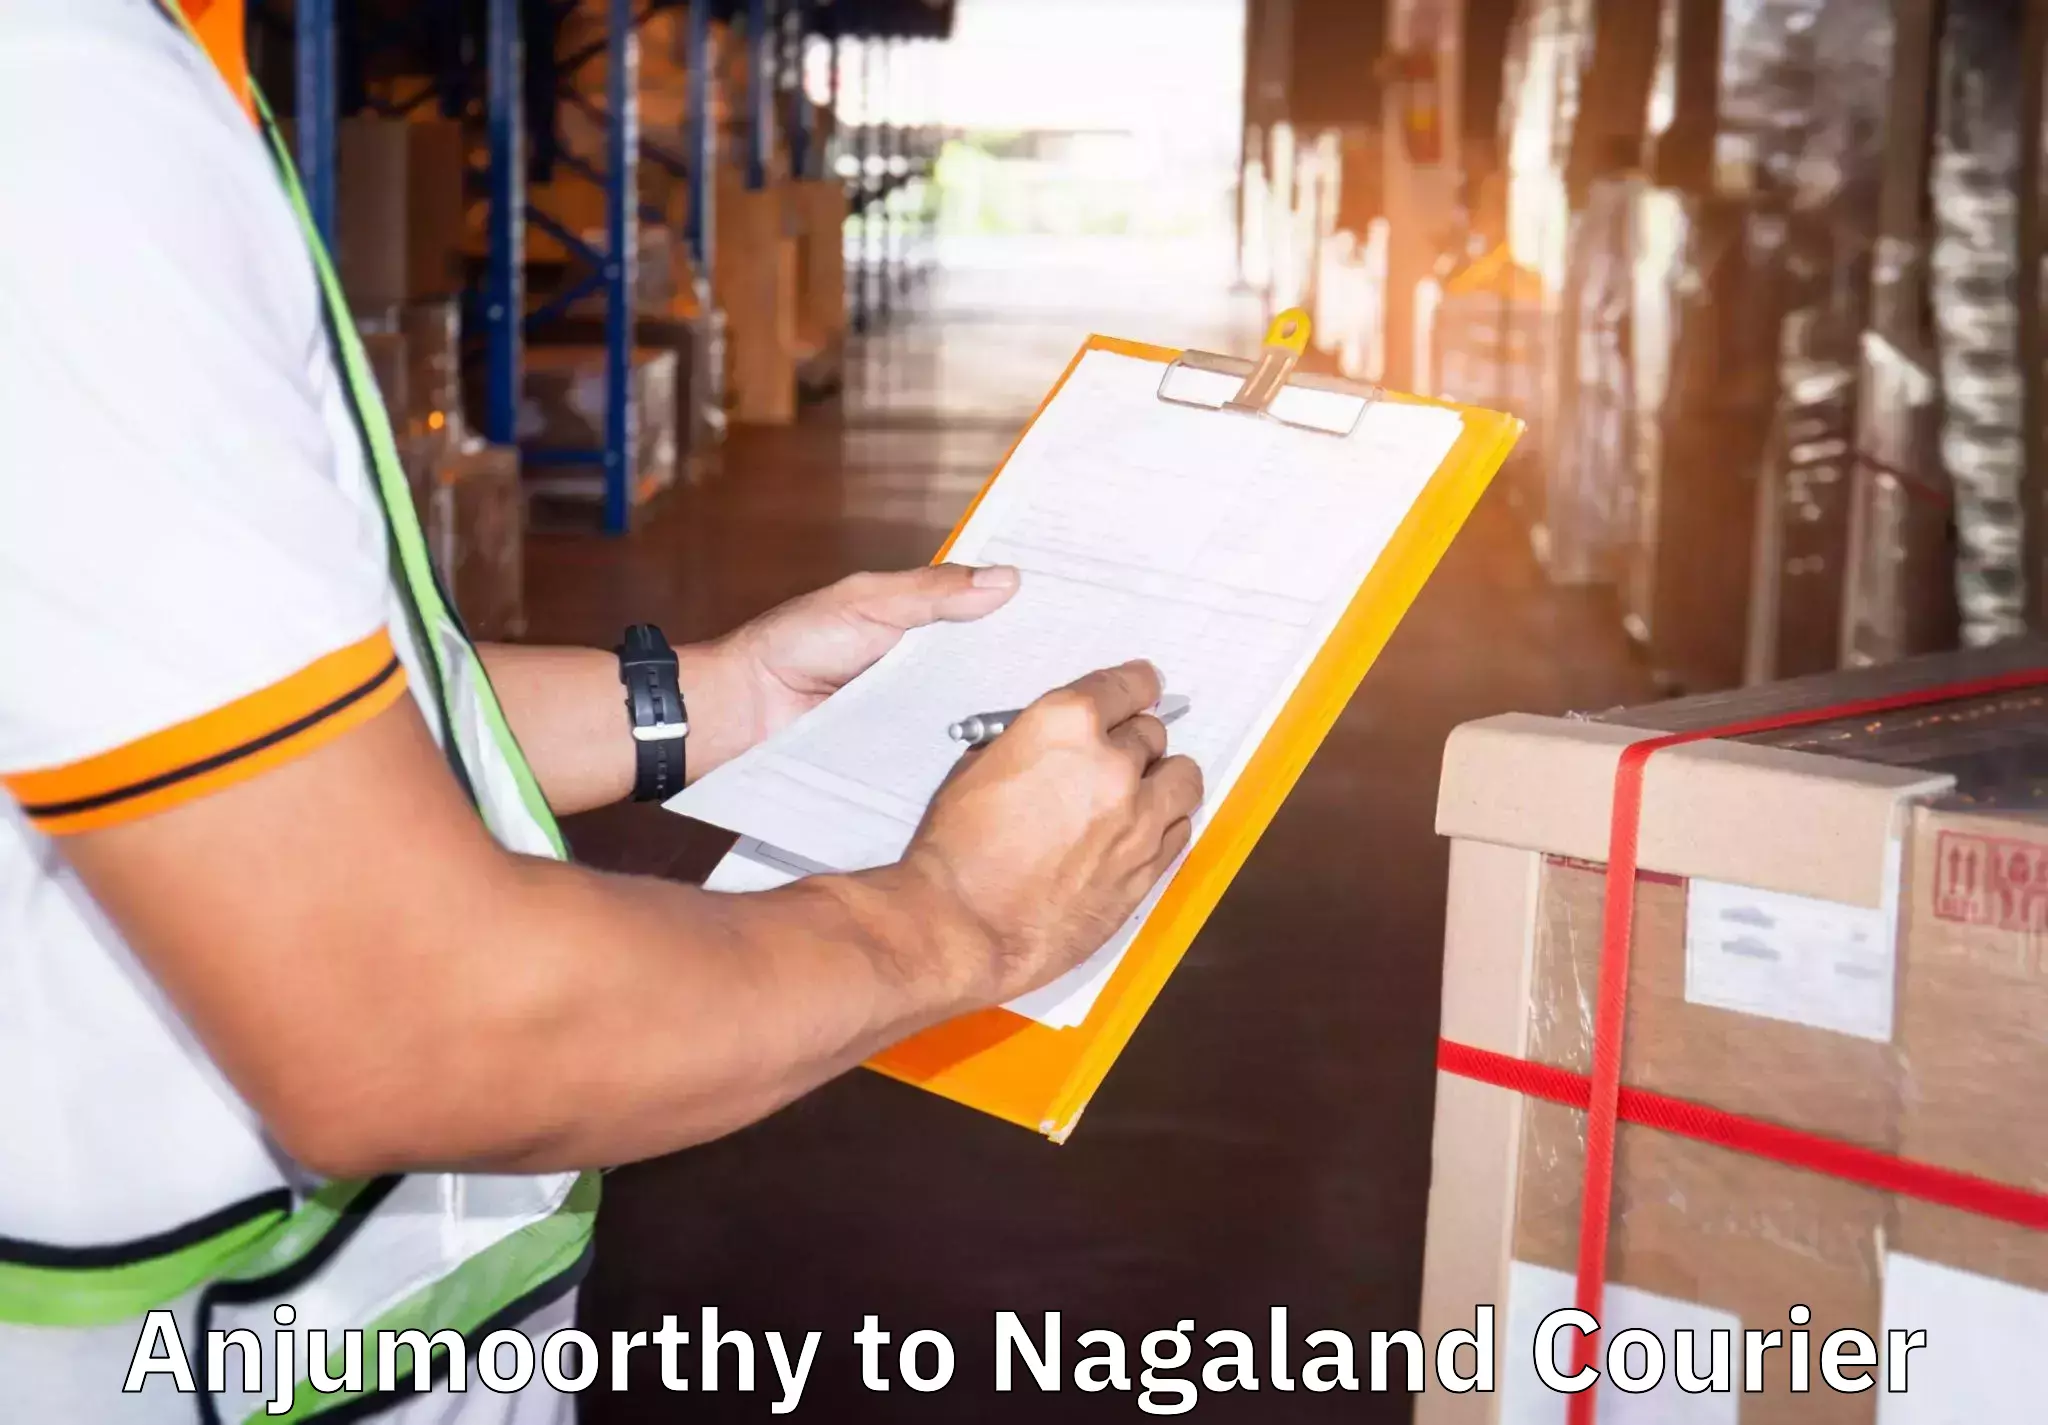 Customized relocation services Anjumoorthy to Nagaland